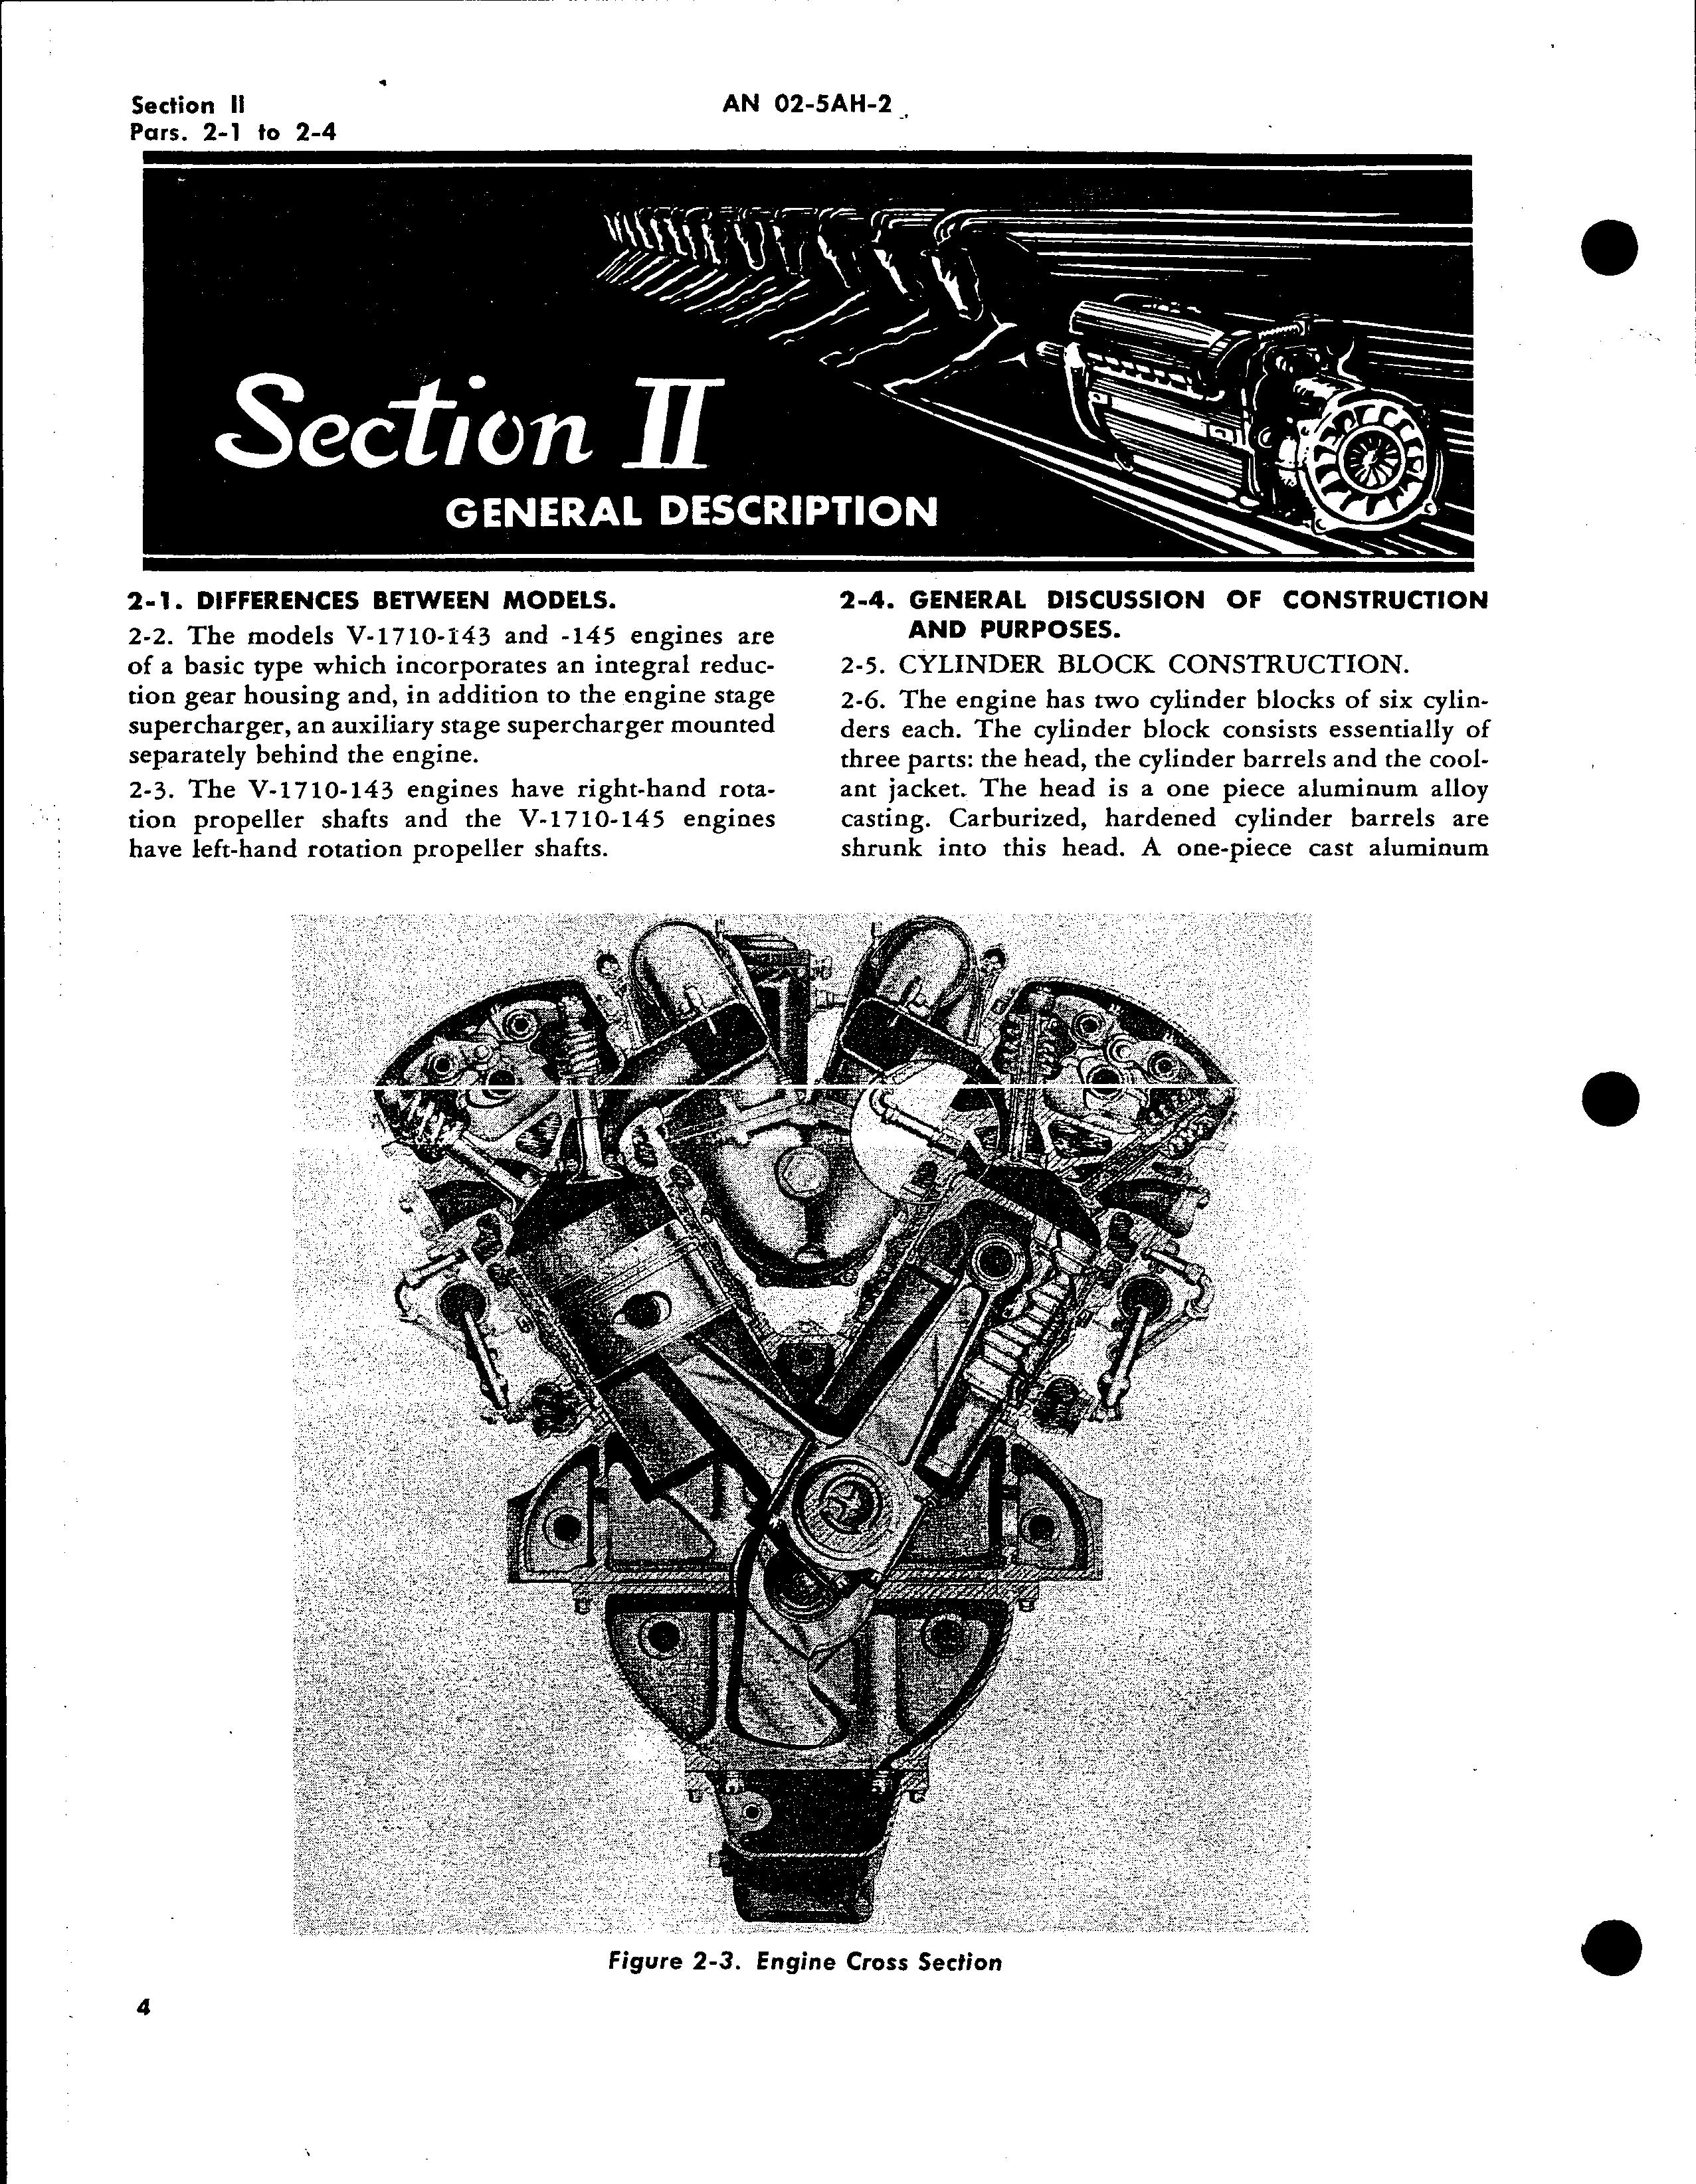 Sample page 8 from AirCorps Library document: Service Instructions for Models V-1710-143 and -145 Aircraft Engines